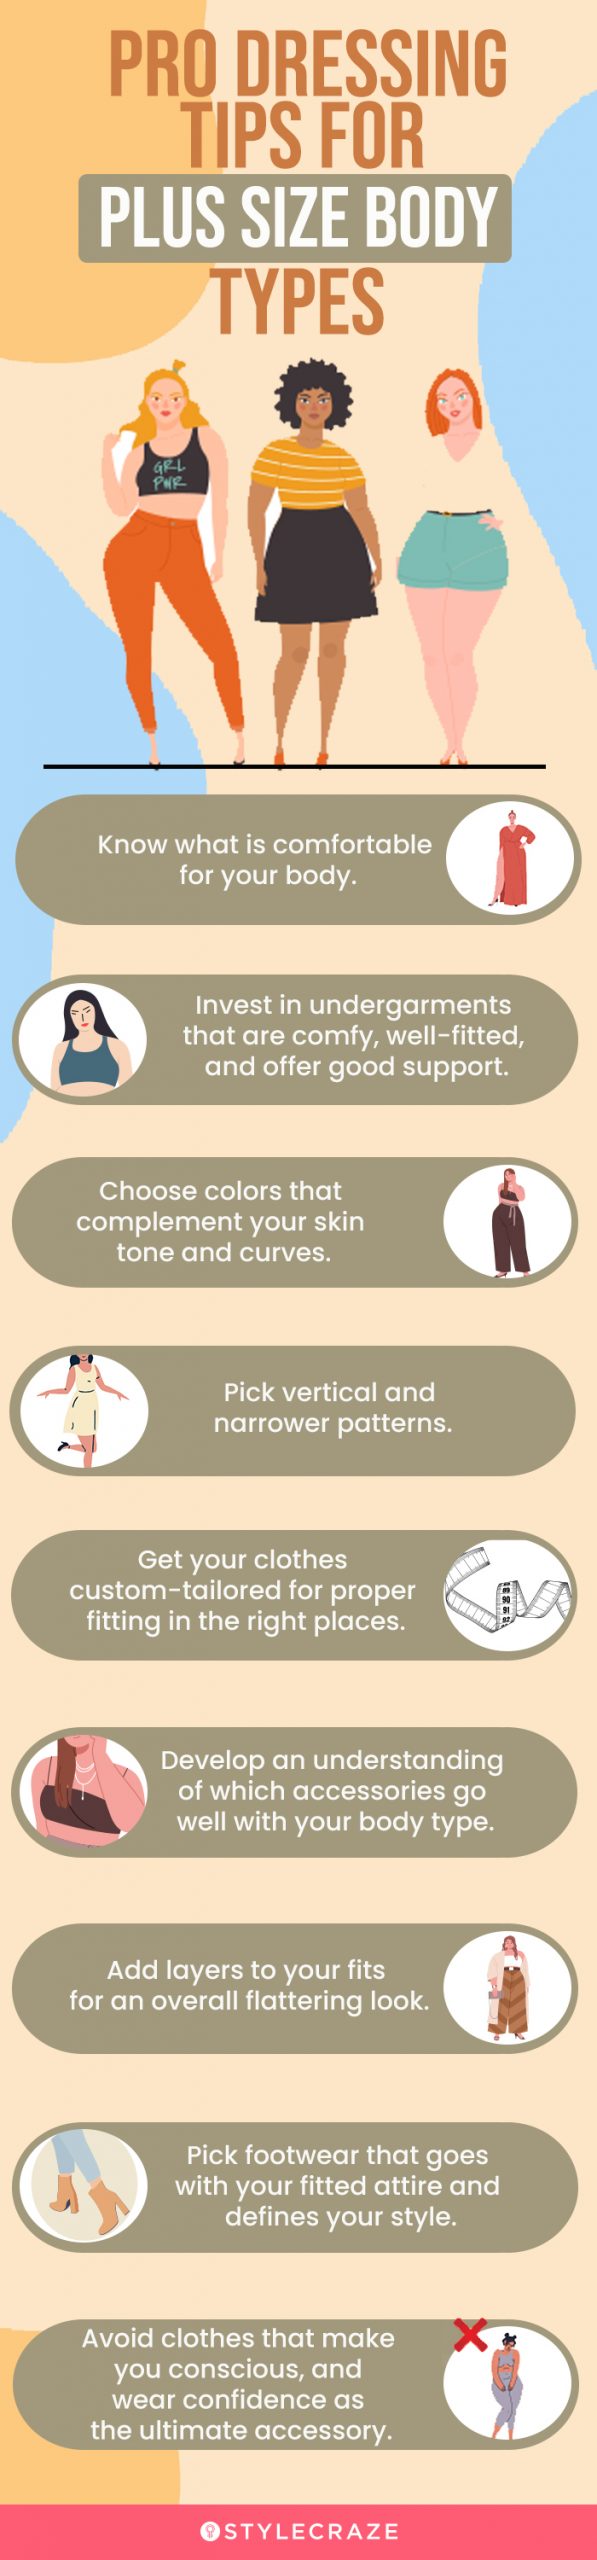 pro dressing tips for plus size body types (infographic)